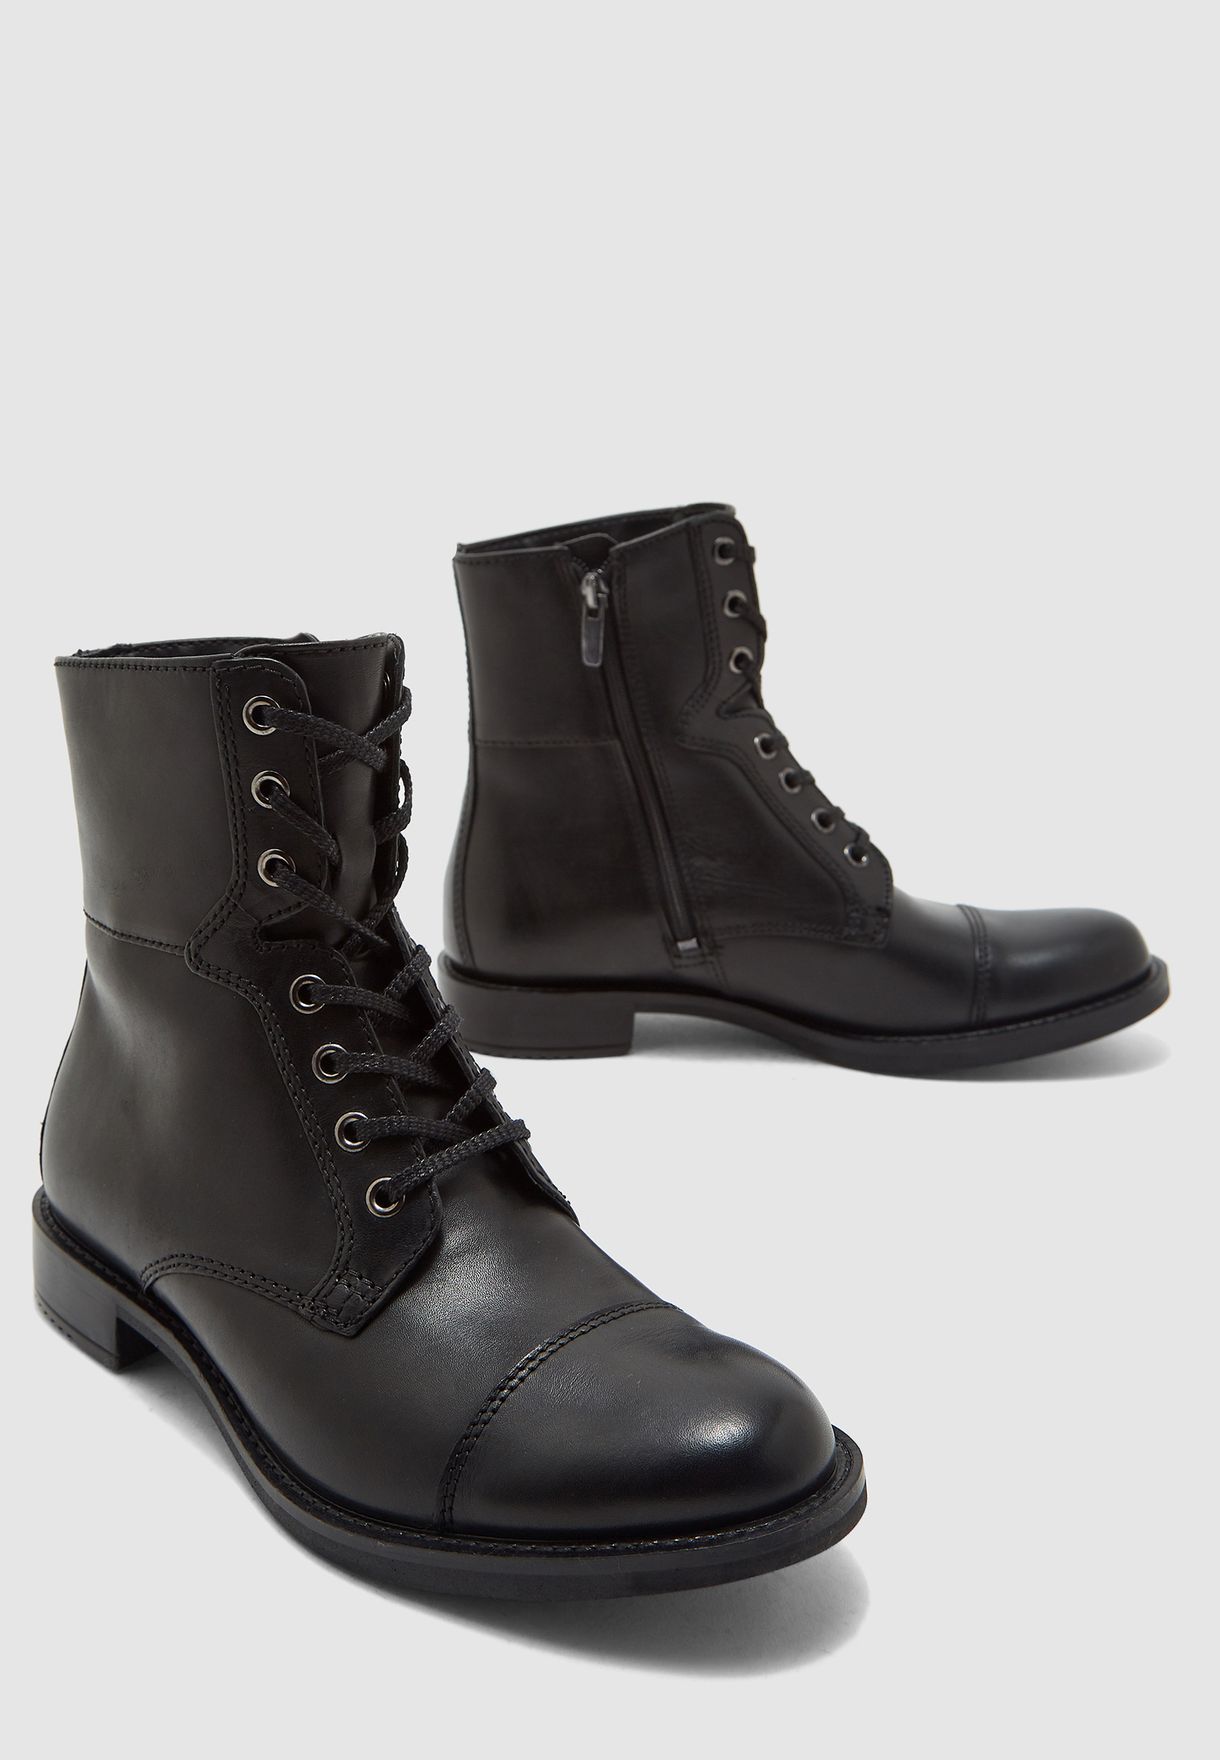 Buy Ecco Black Lace Up Ankle Boot for 